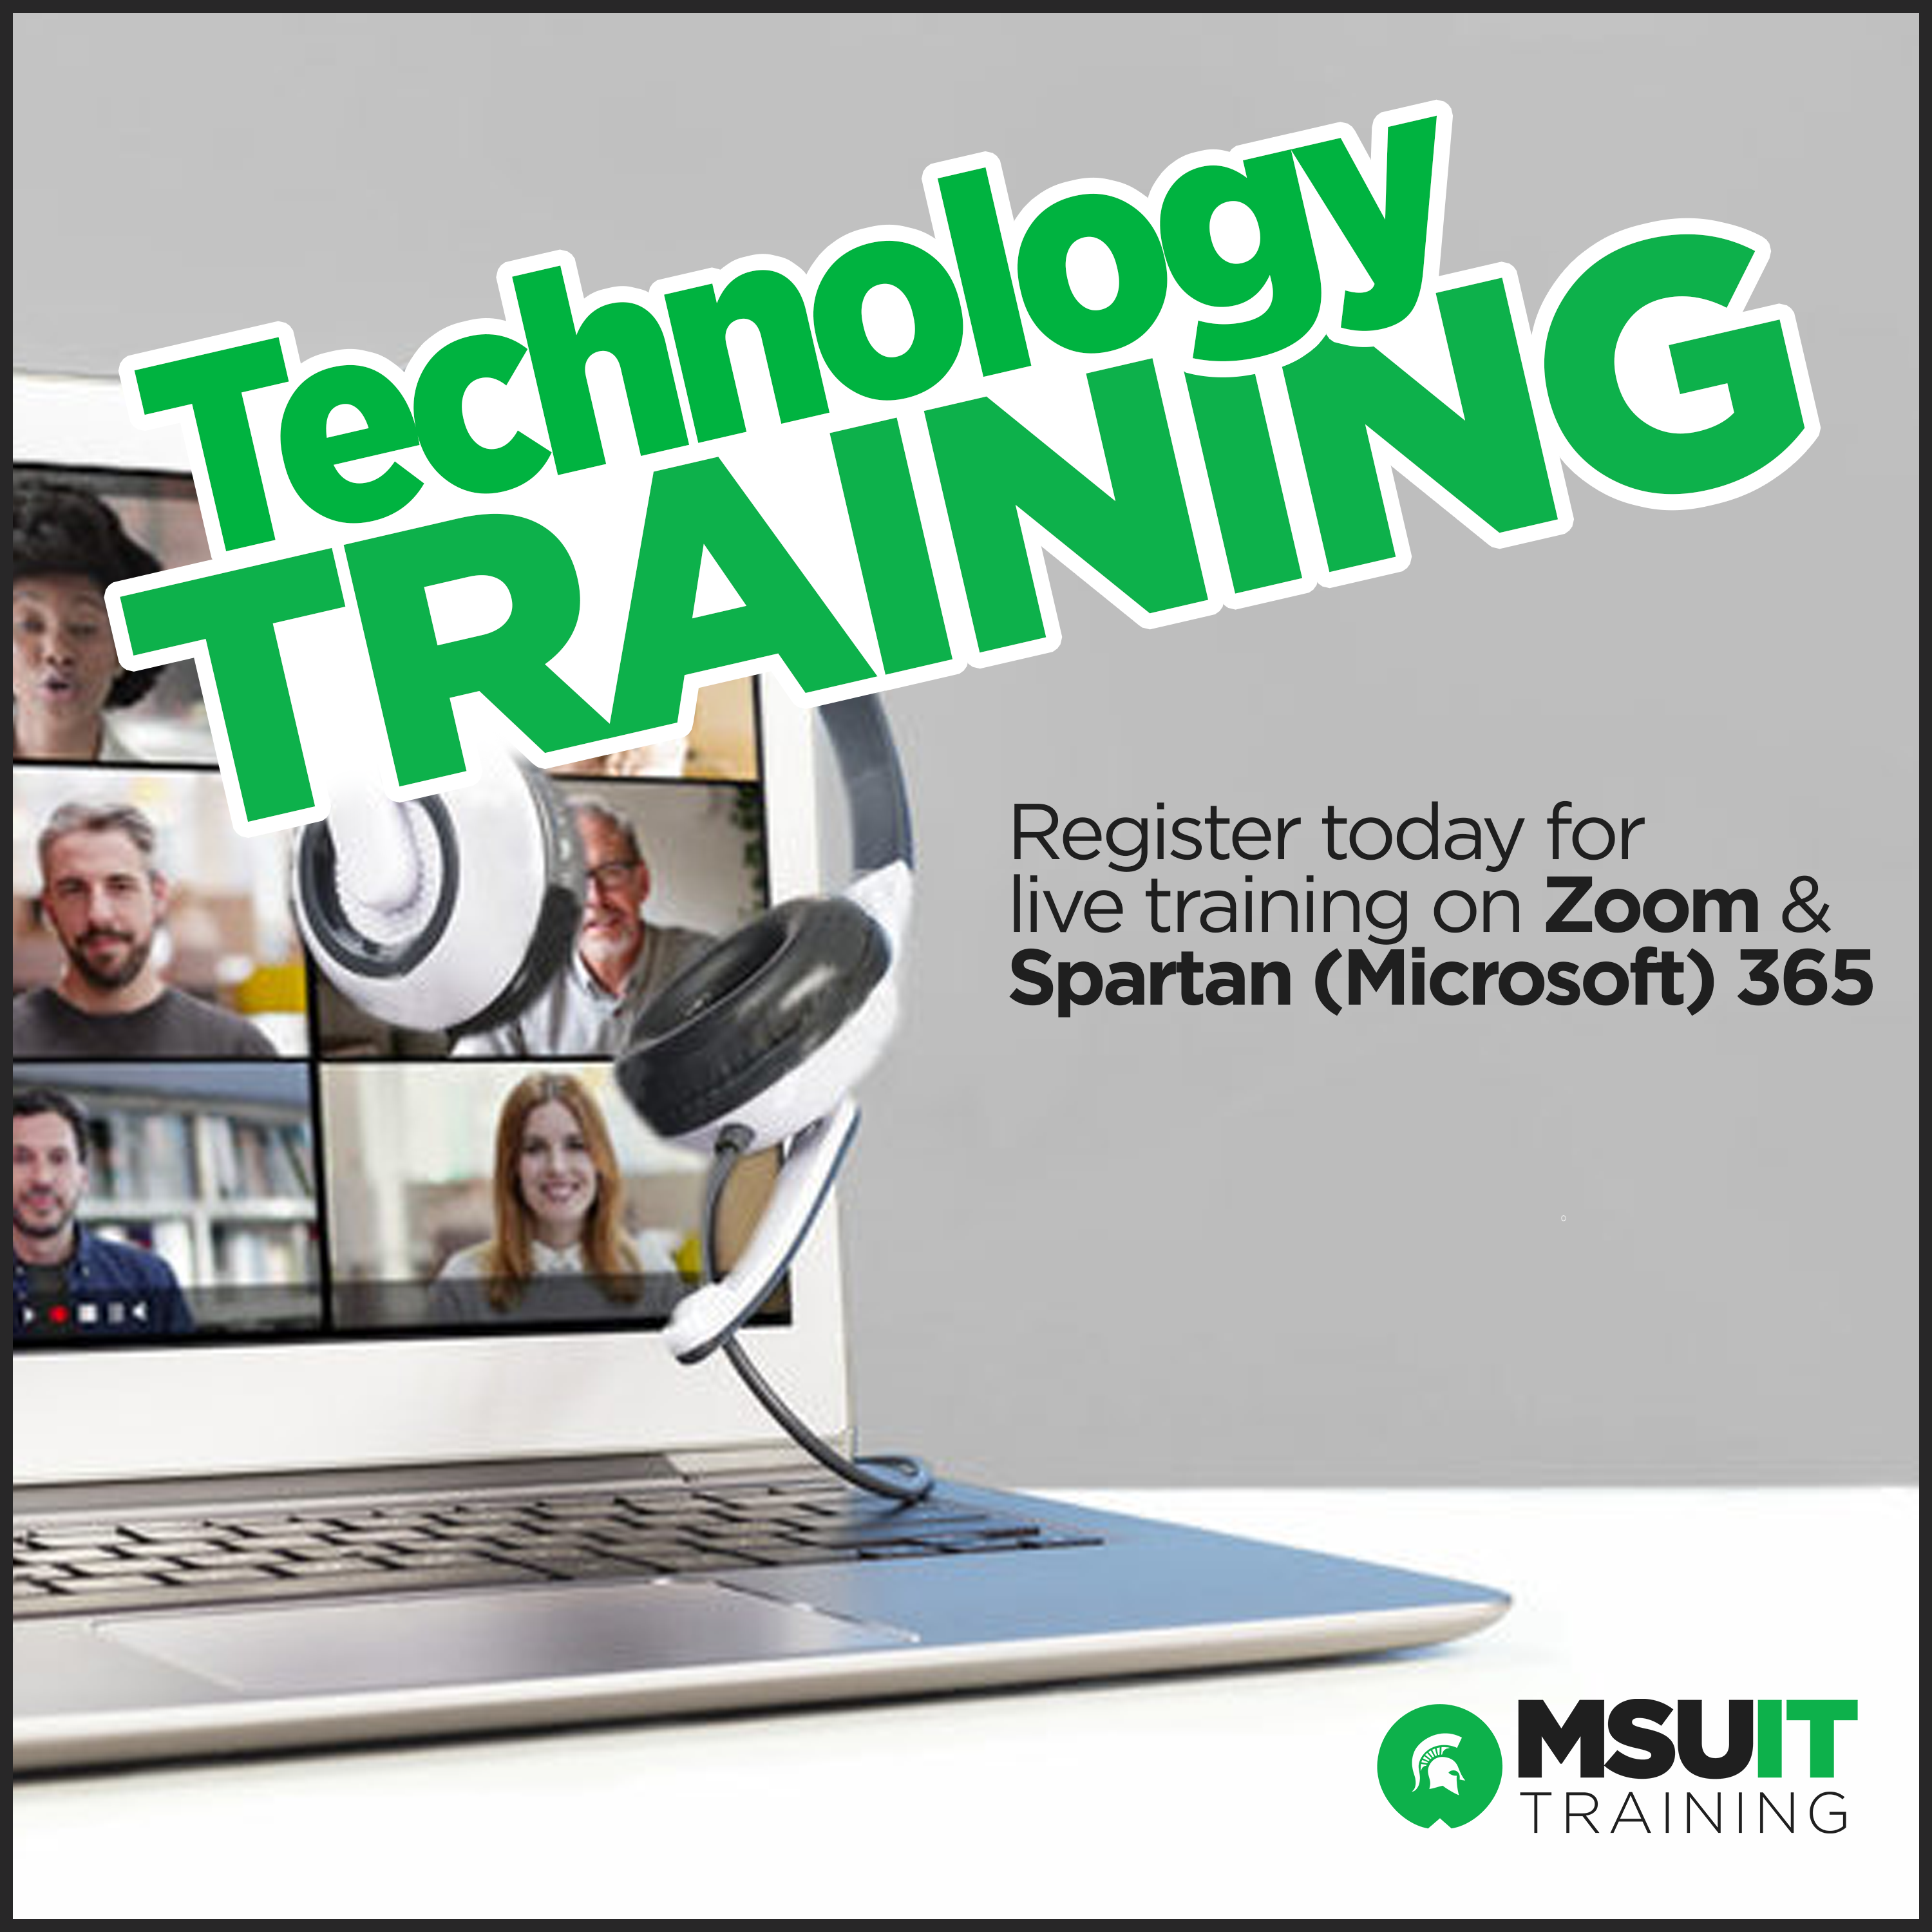 Laptop with headset promoting tech training